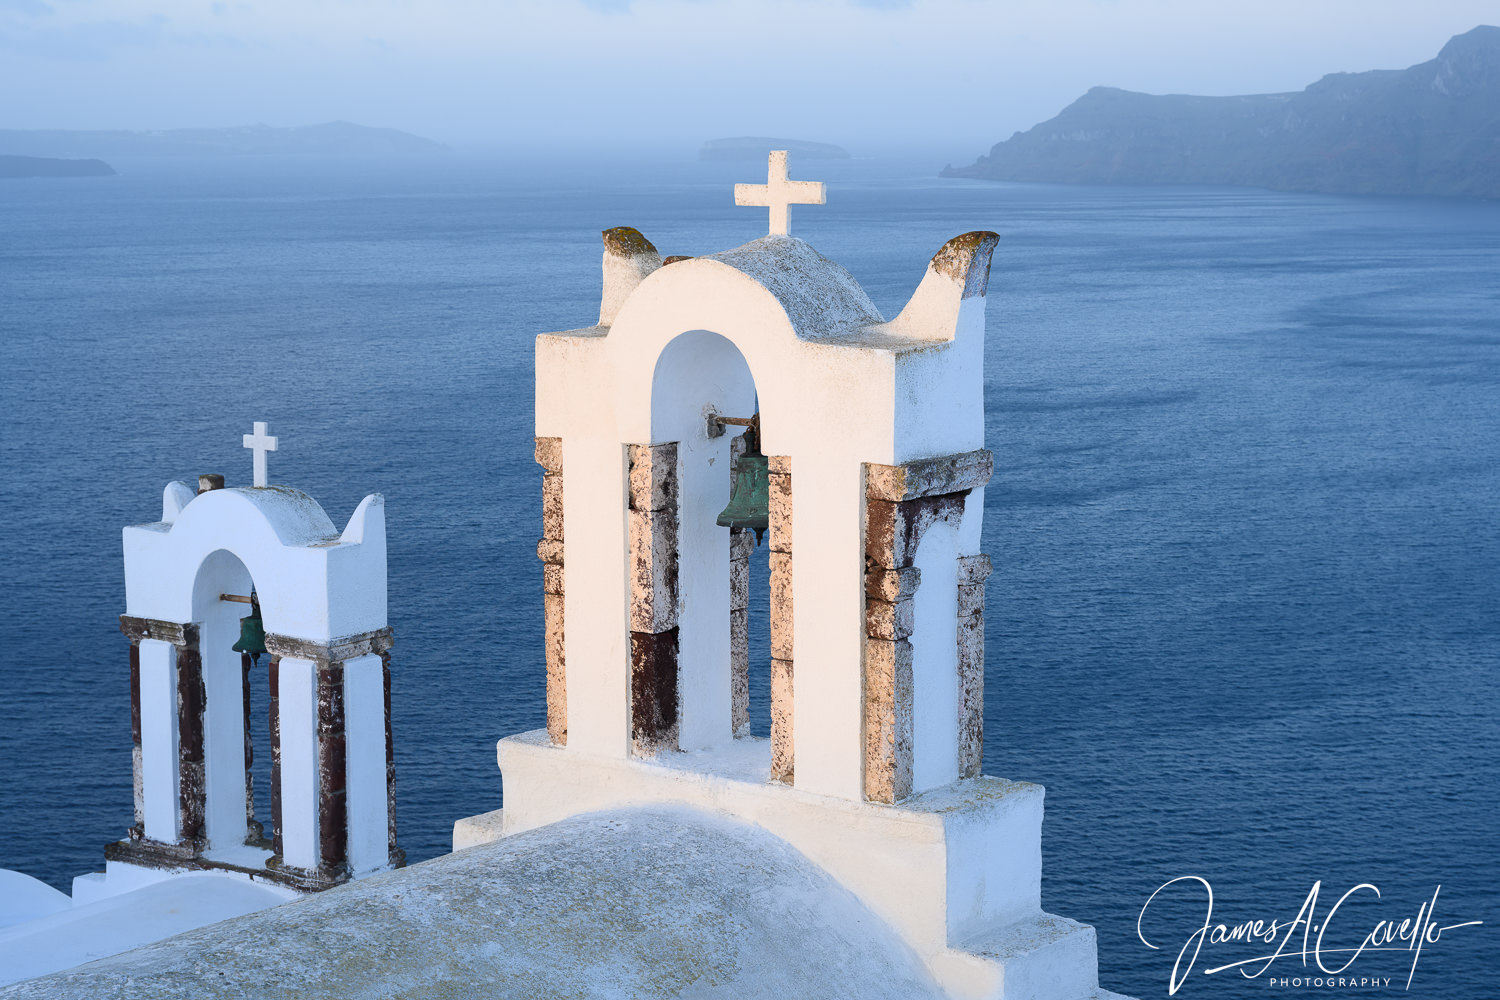 The sea sits behind two white belltowers with crosses on their tops.